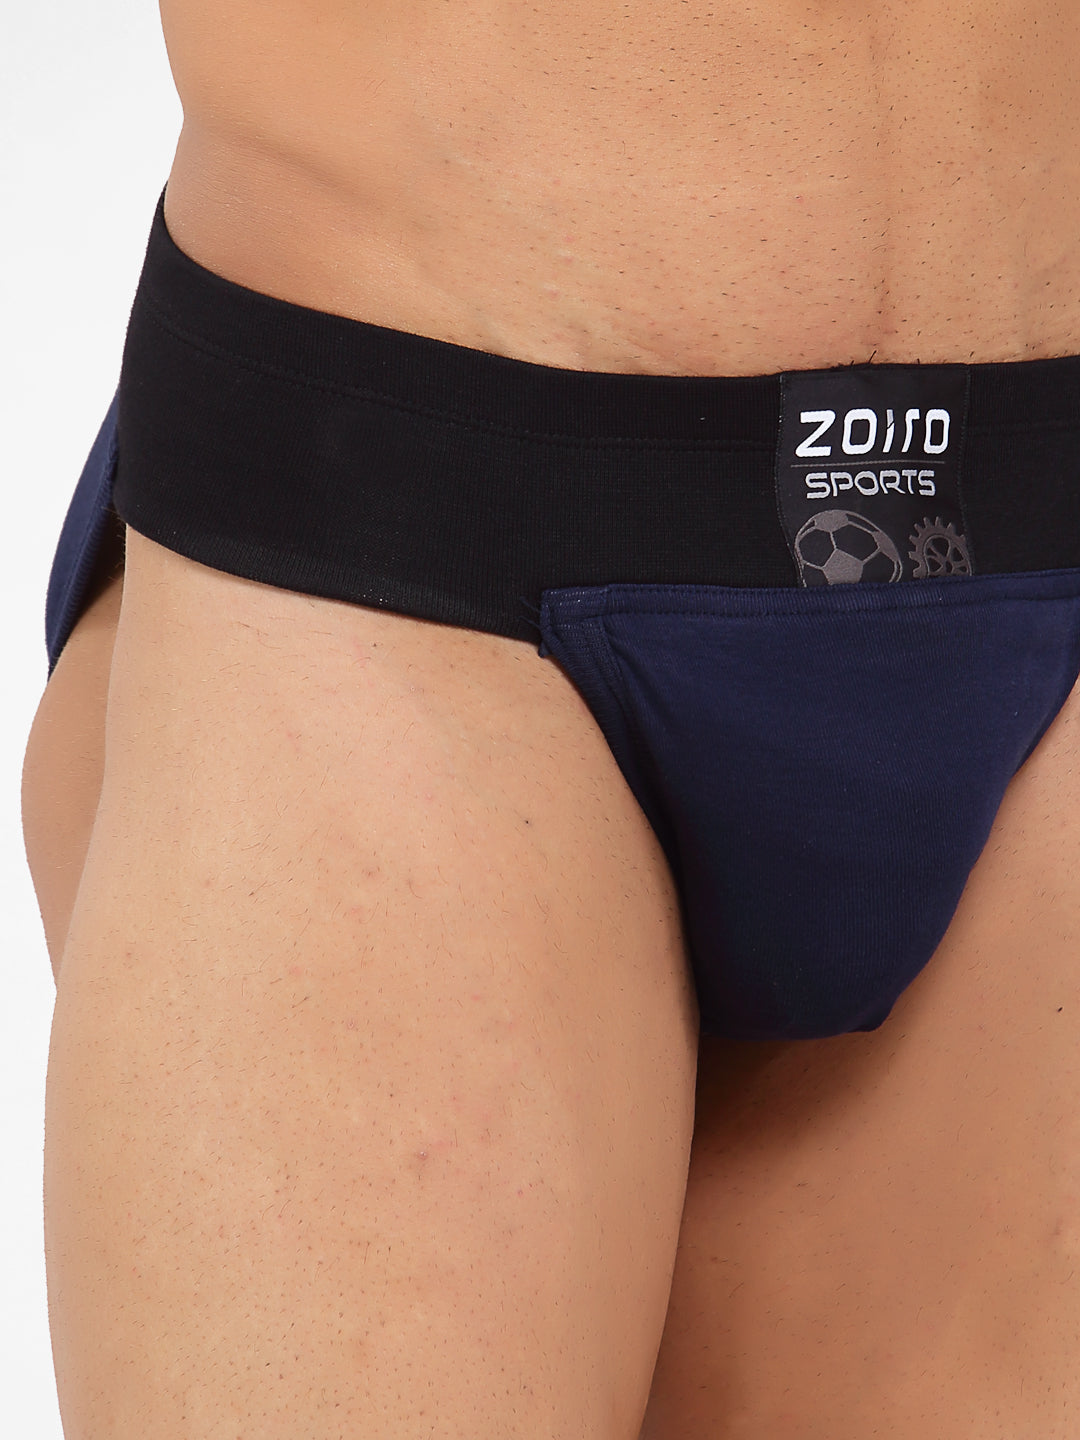 Zoiro Men&#39;s Cotton Sports Gym Supporter Brief (Pack of 2) Chinese Red + Navy